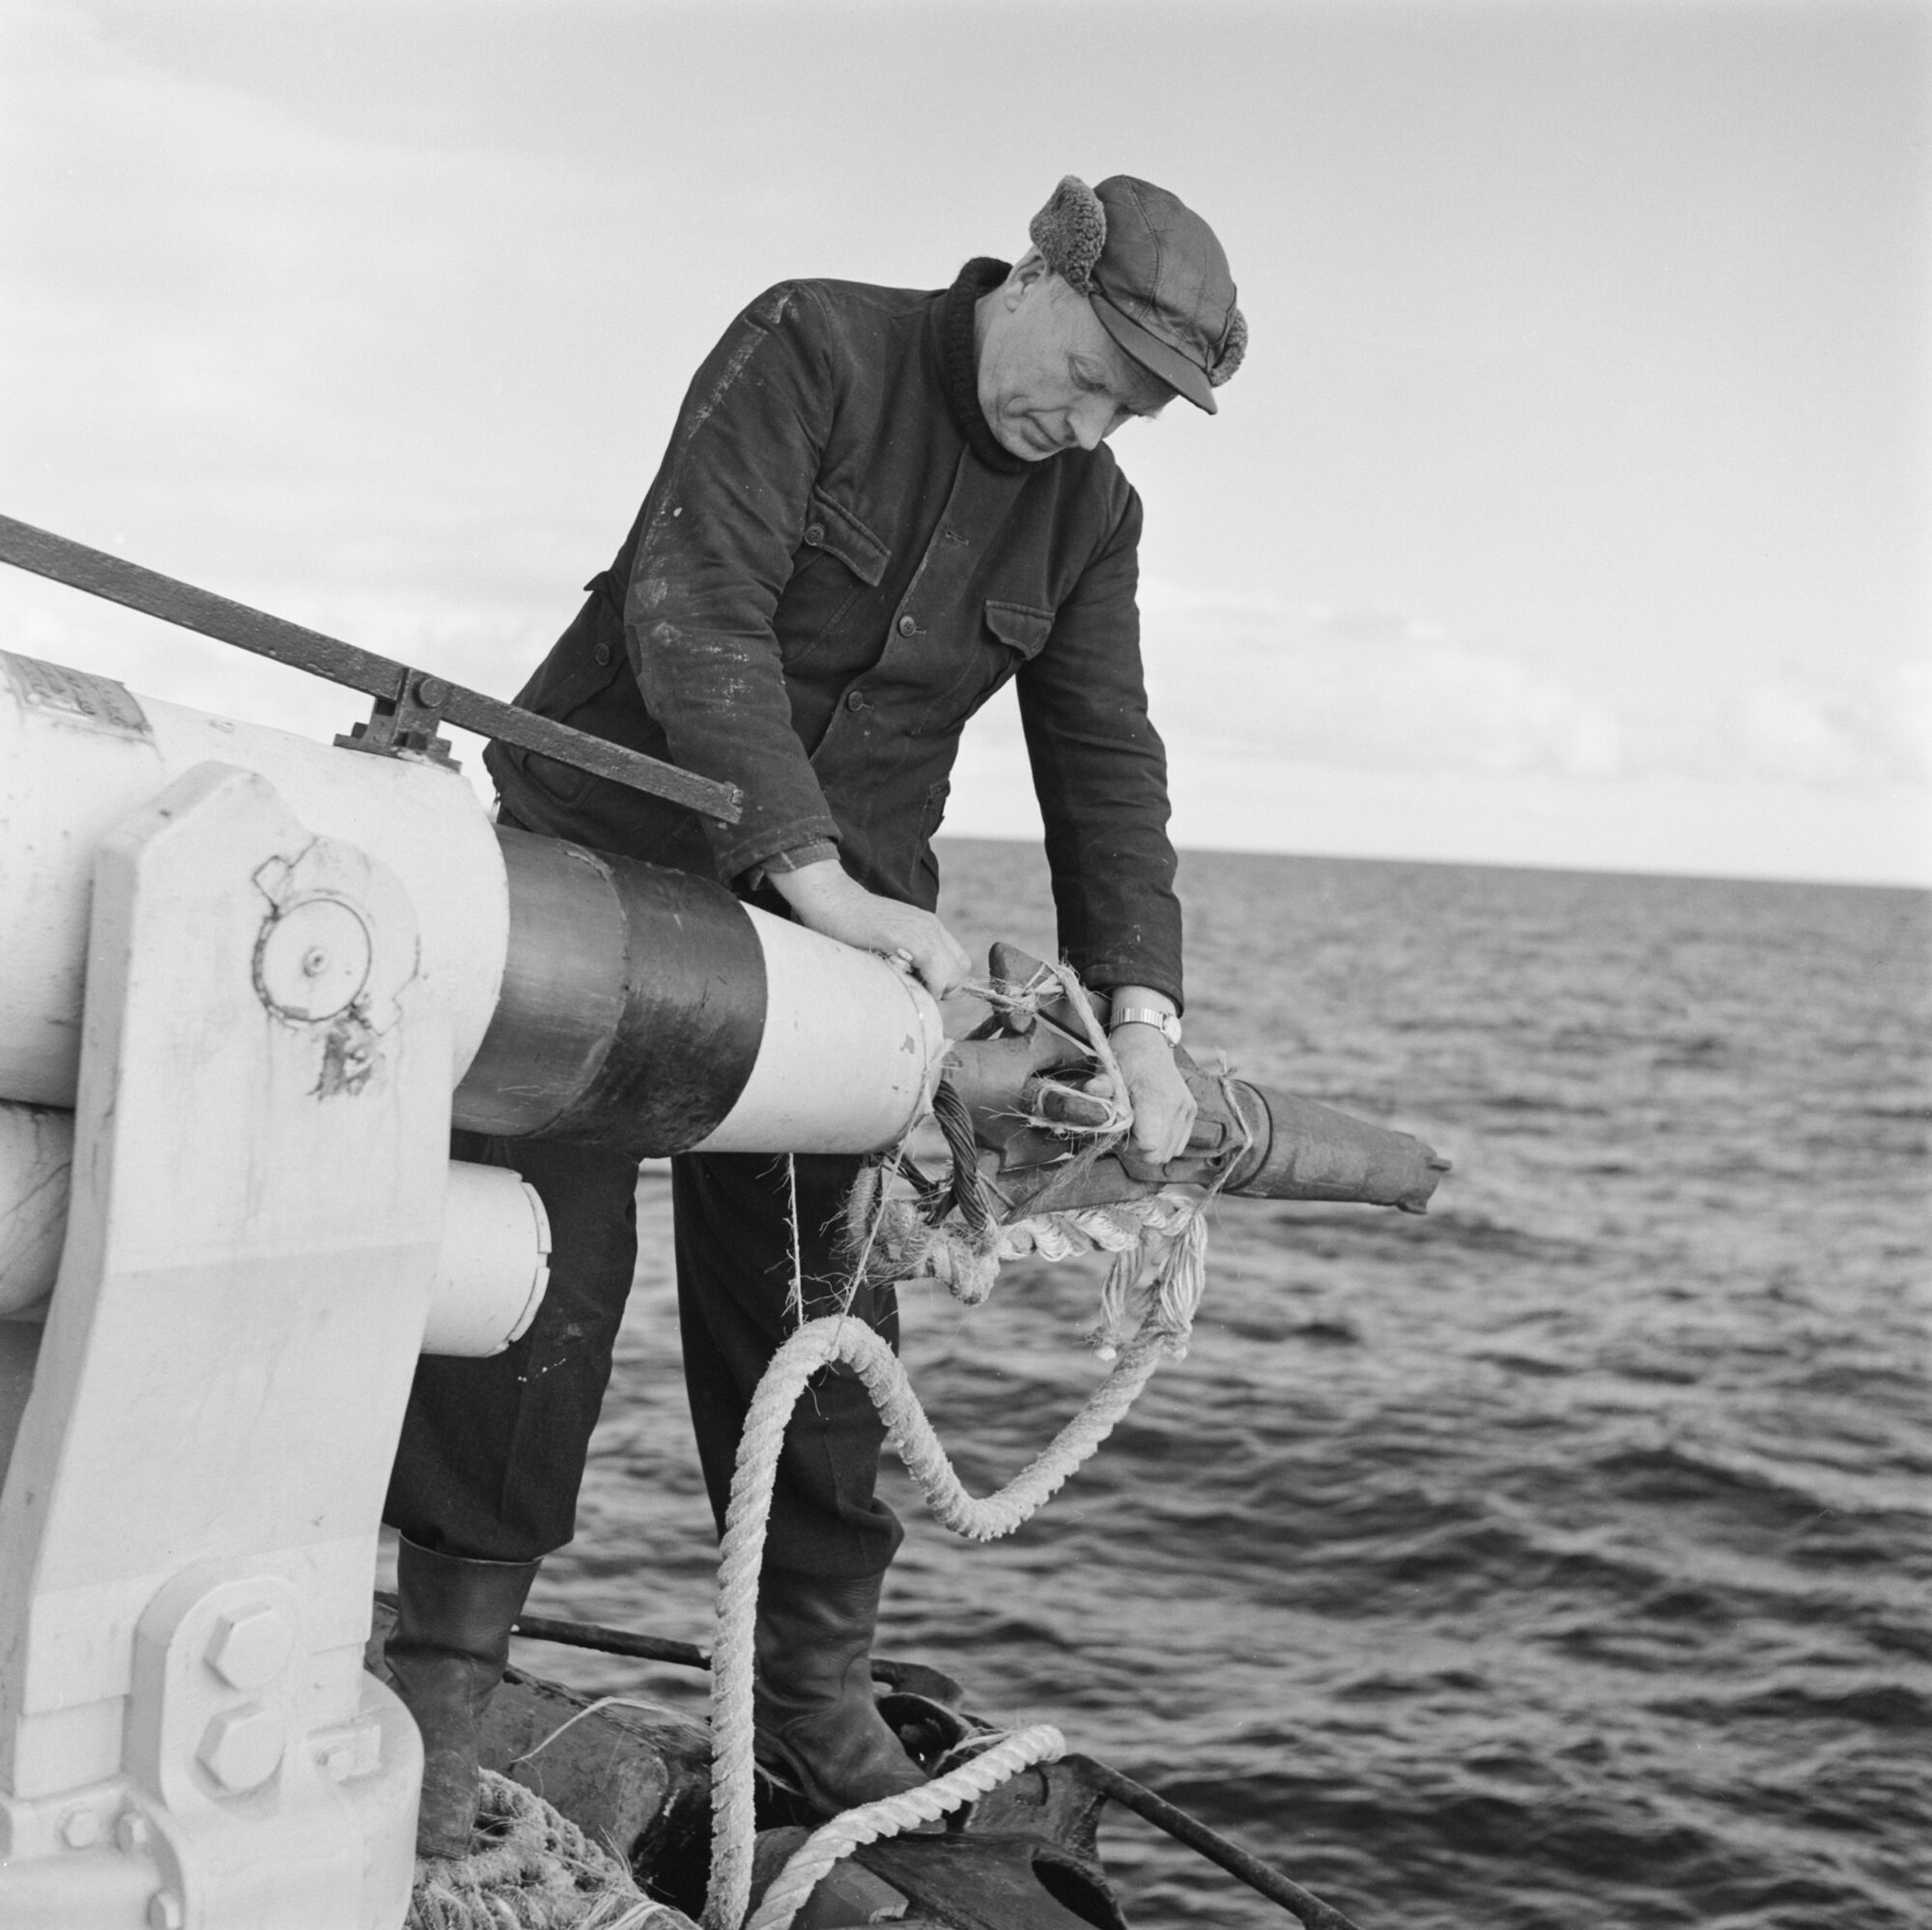 A man loading a harpoon with the sea behind him